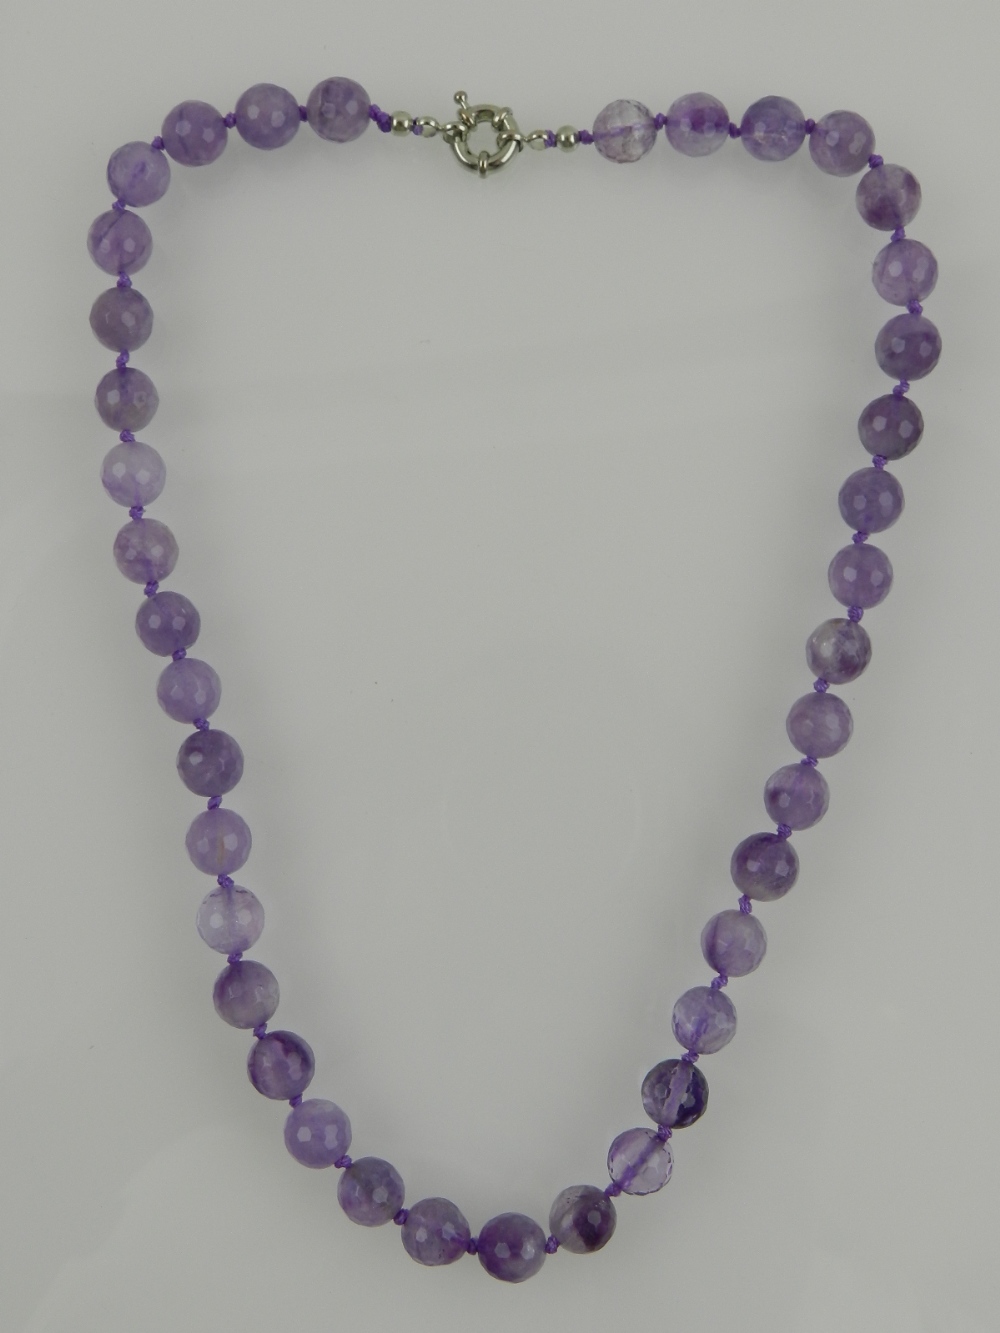 A faceted amethyst bead necklace, with white metal clasp.